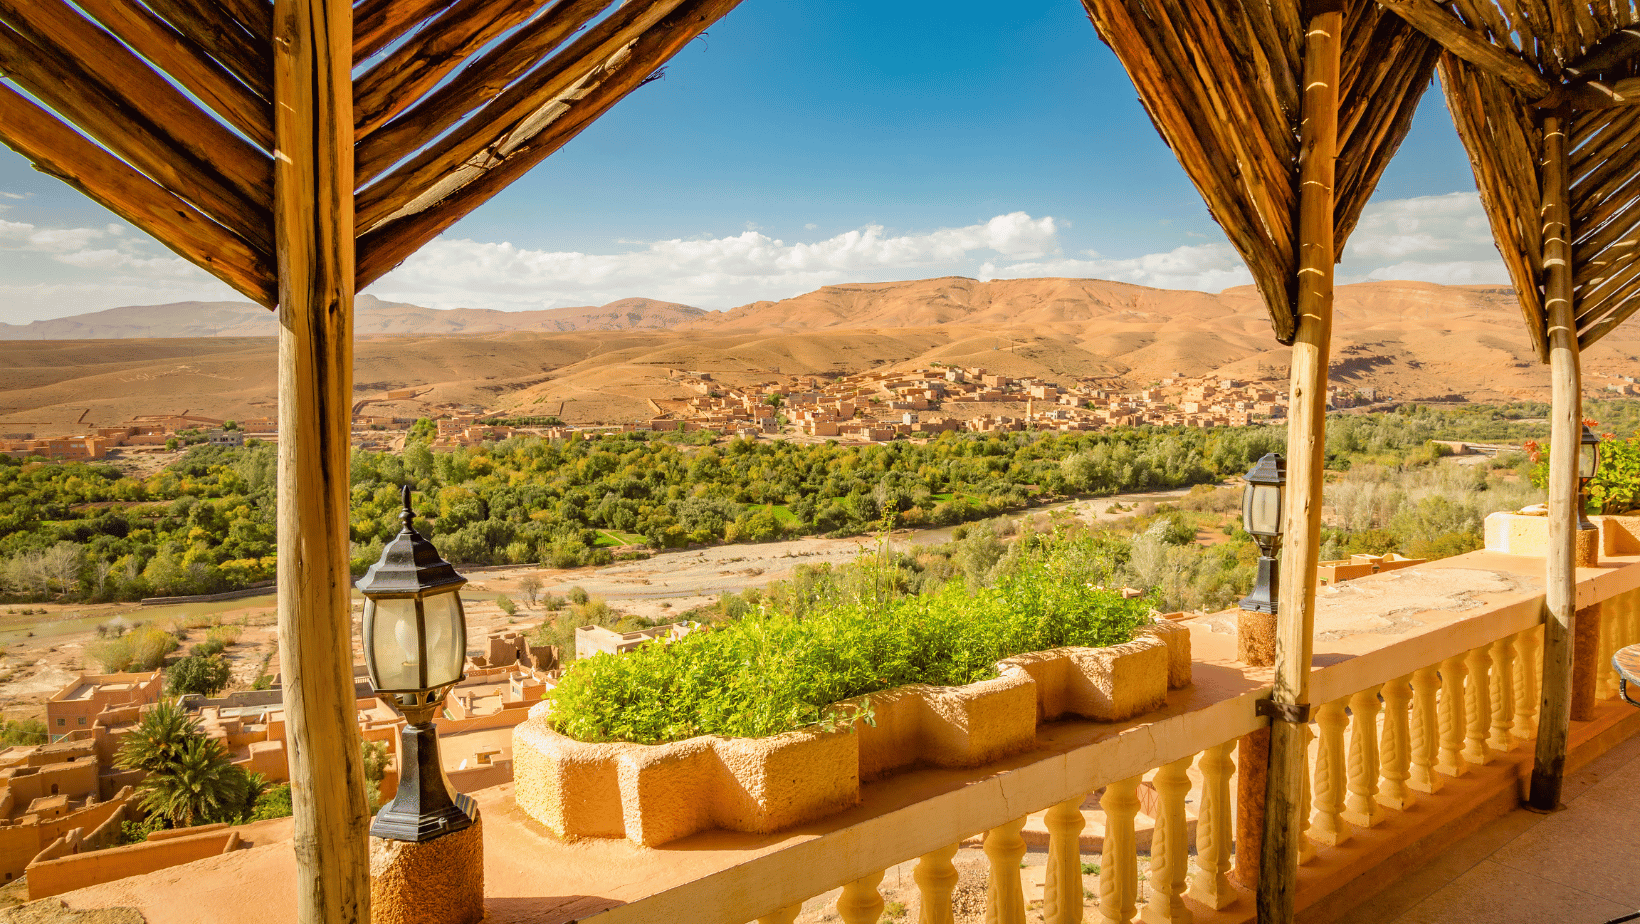 DAY TRIP TO THE OURIKA VALLEY FROM MARRAKECH